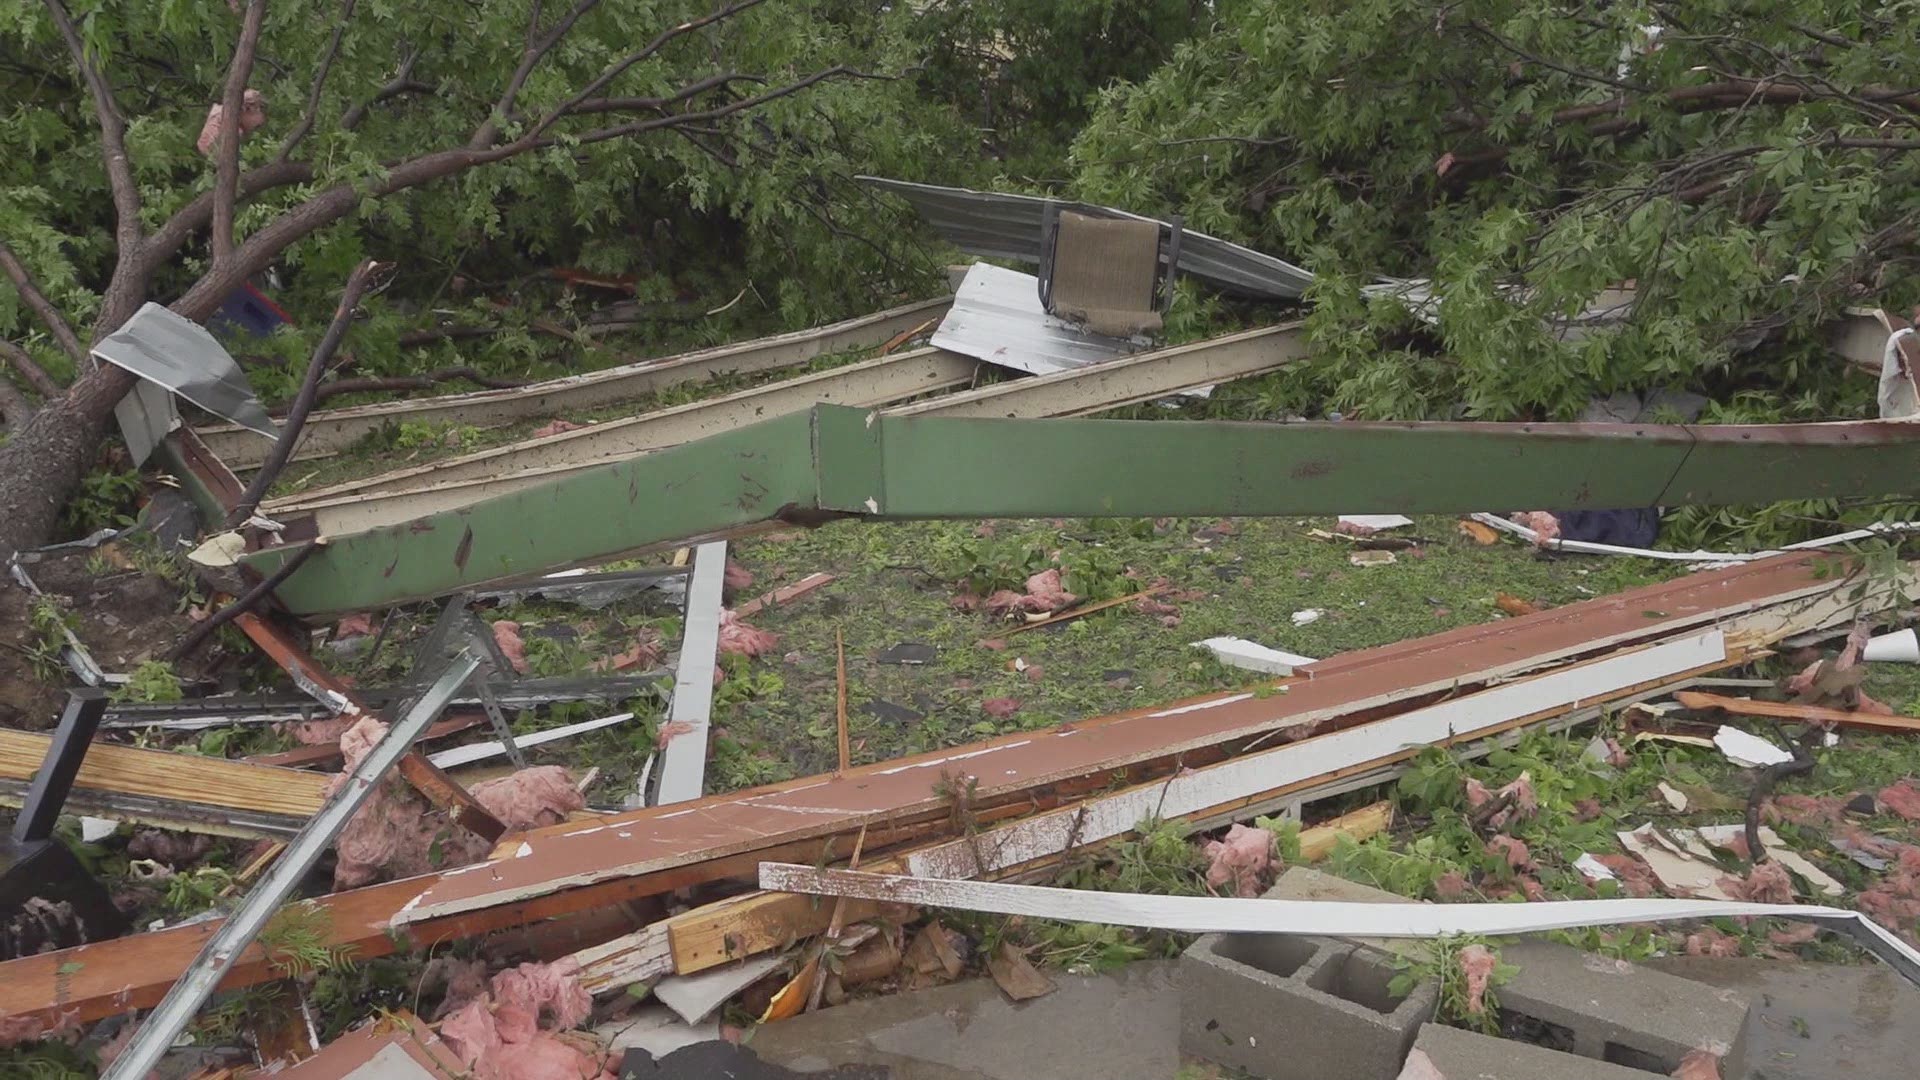 The city of Ballinger, Texas was hit by severe weather Saturday morning. We spoke to local residents whose homes were destroyed by a tornado.